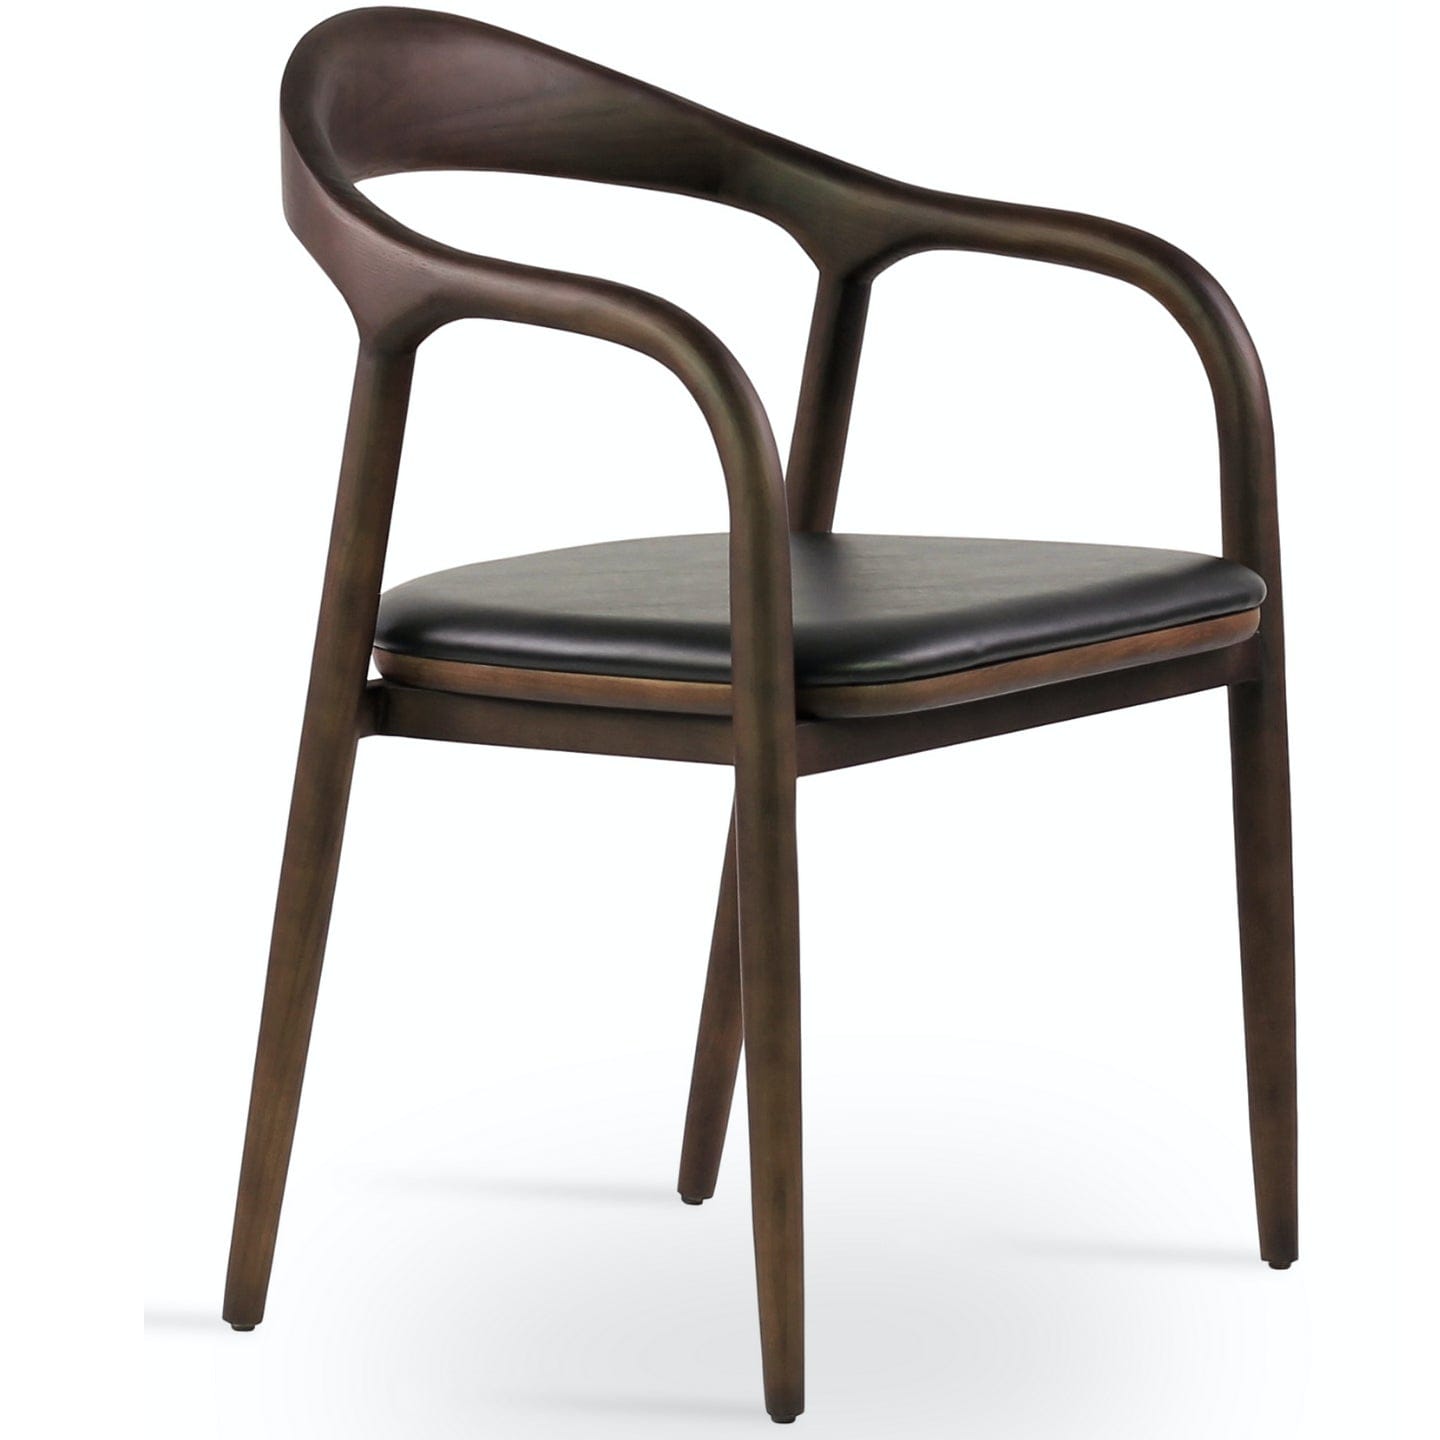 Soho Concept infinity-armchair-walnut-wood-base-faux-leather-seat-dining-chair-in-black